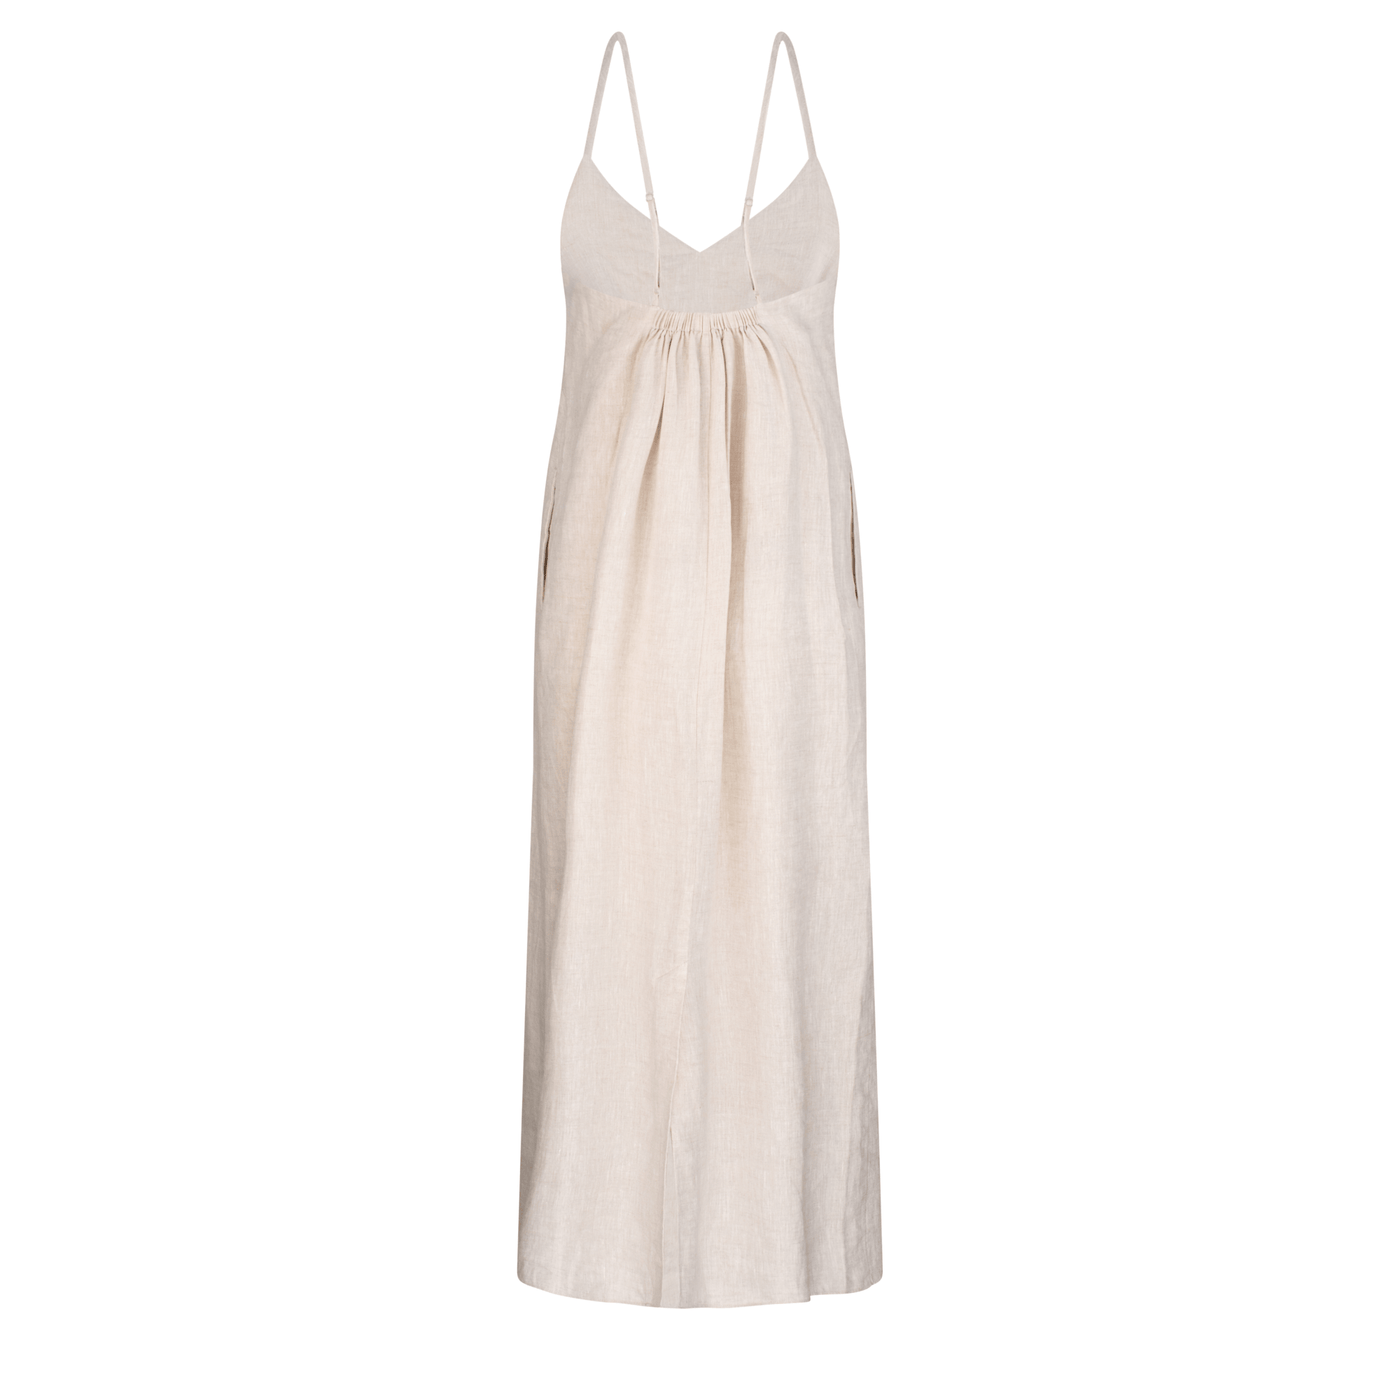 Lilly Pilly Collection 100% organic linen Sophie Linen Slip in Oatmeal, as a 3D model showing back view